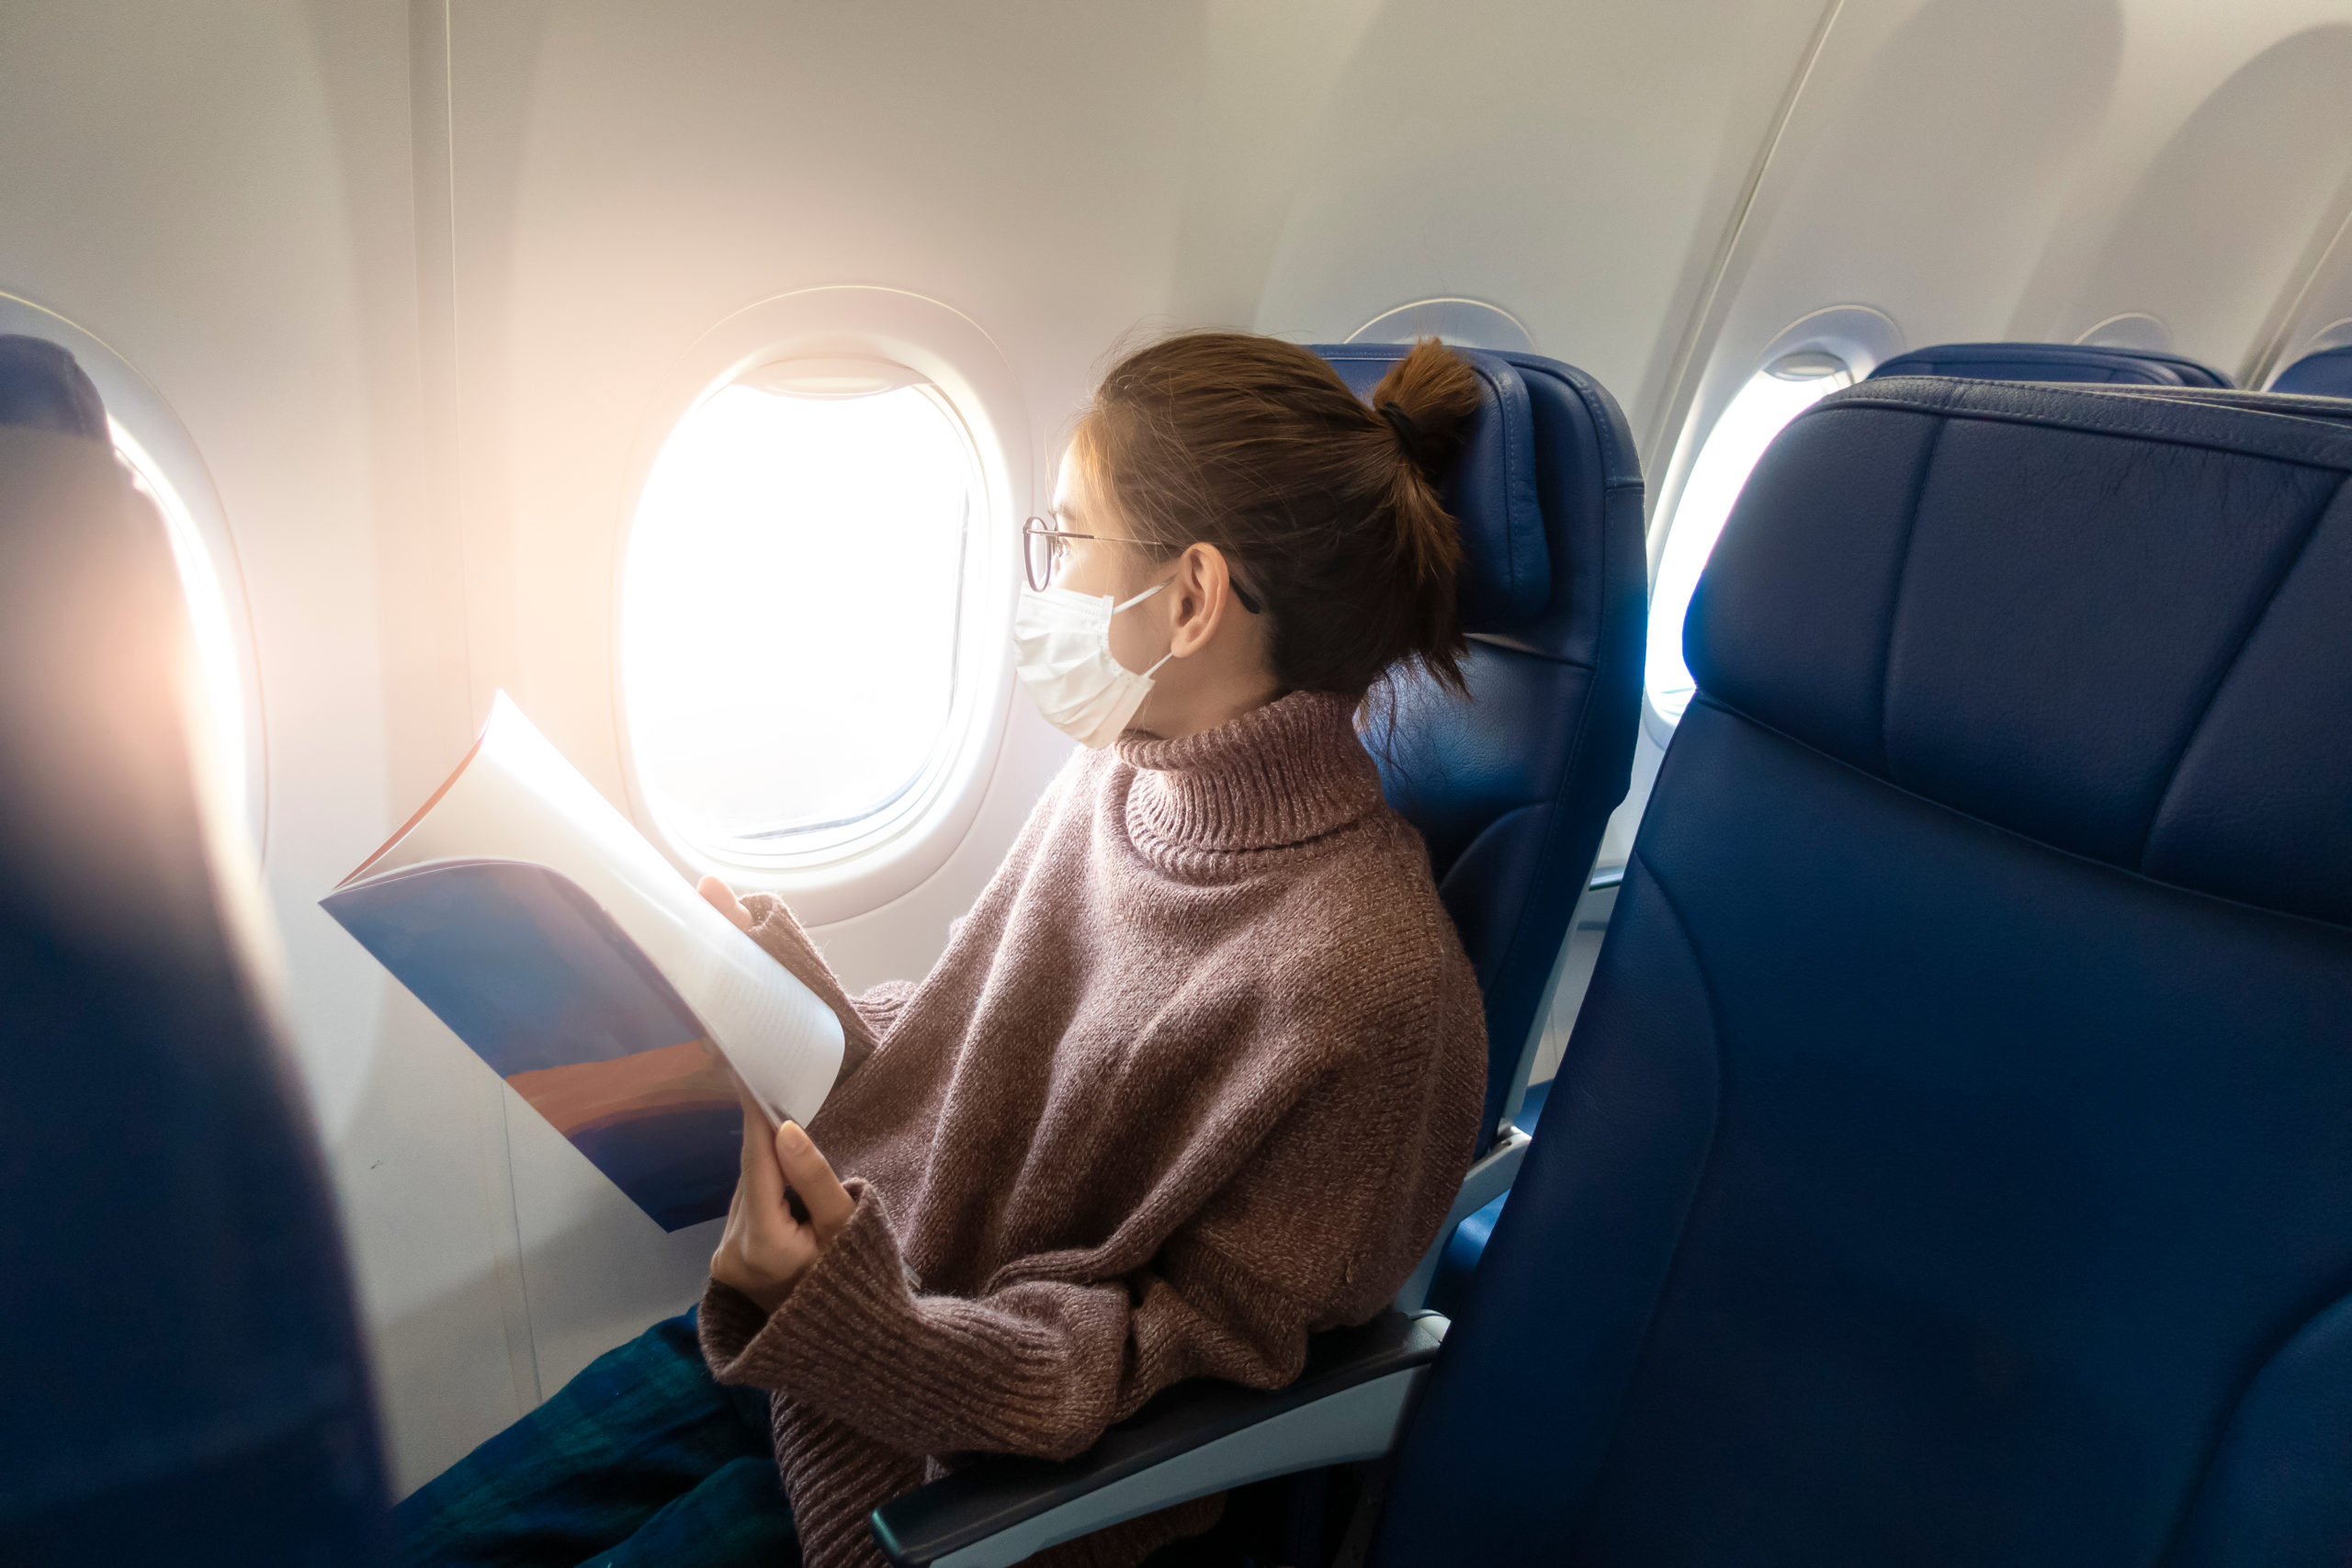 How to Stay Safe While Flying